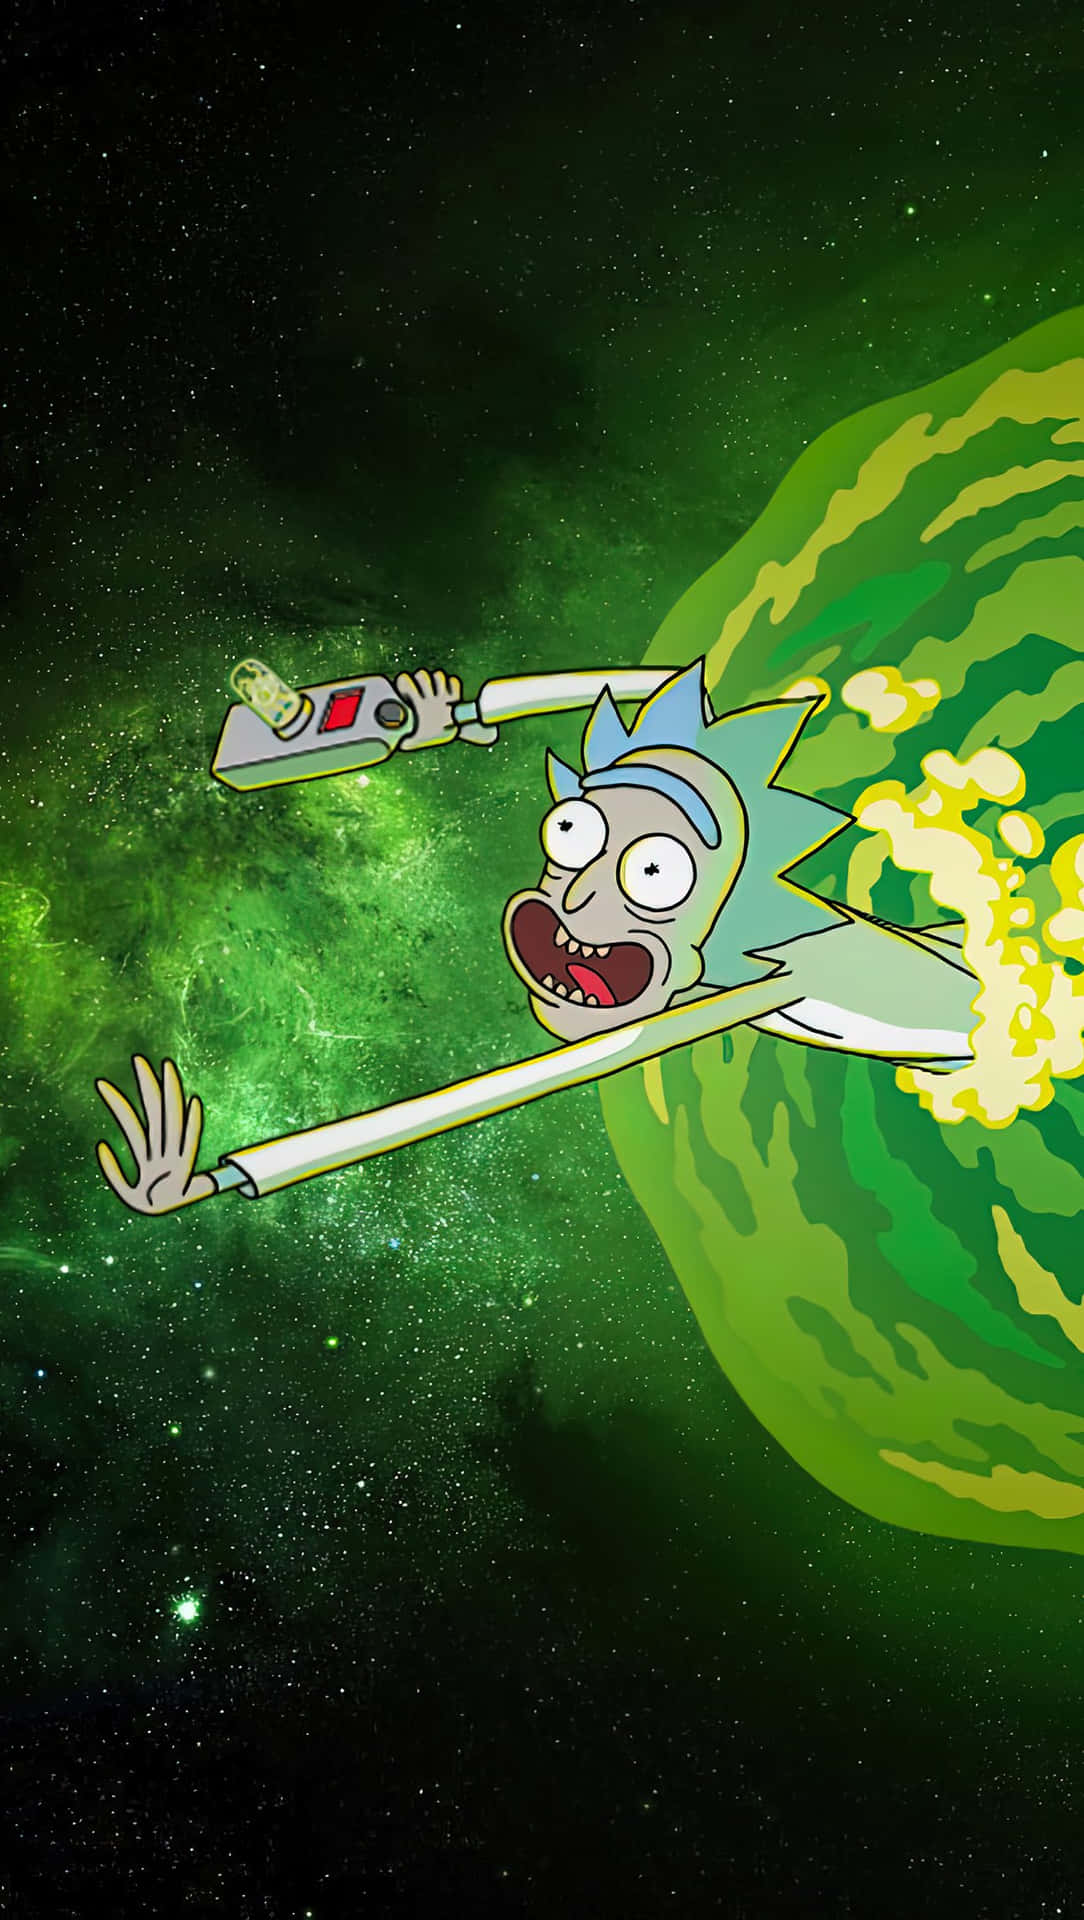 Enter the world of Rick and Morty with a Portal Wallpaper